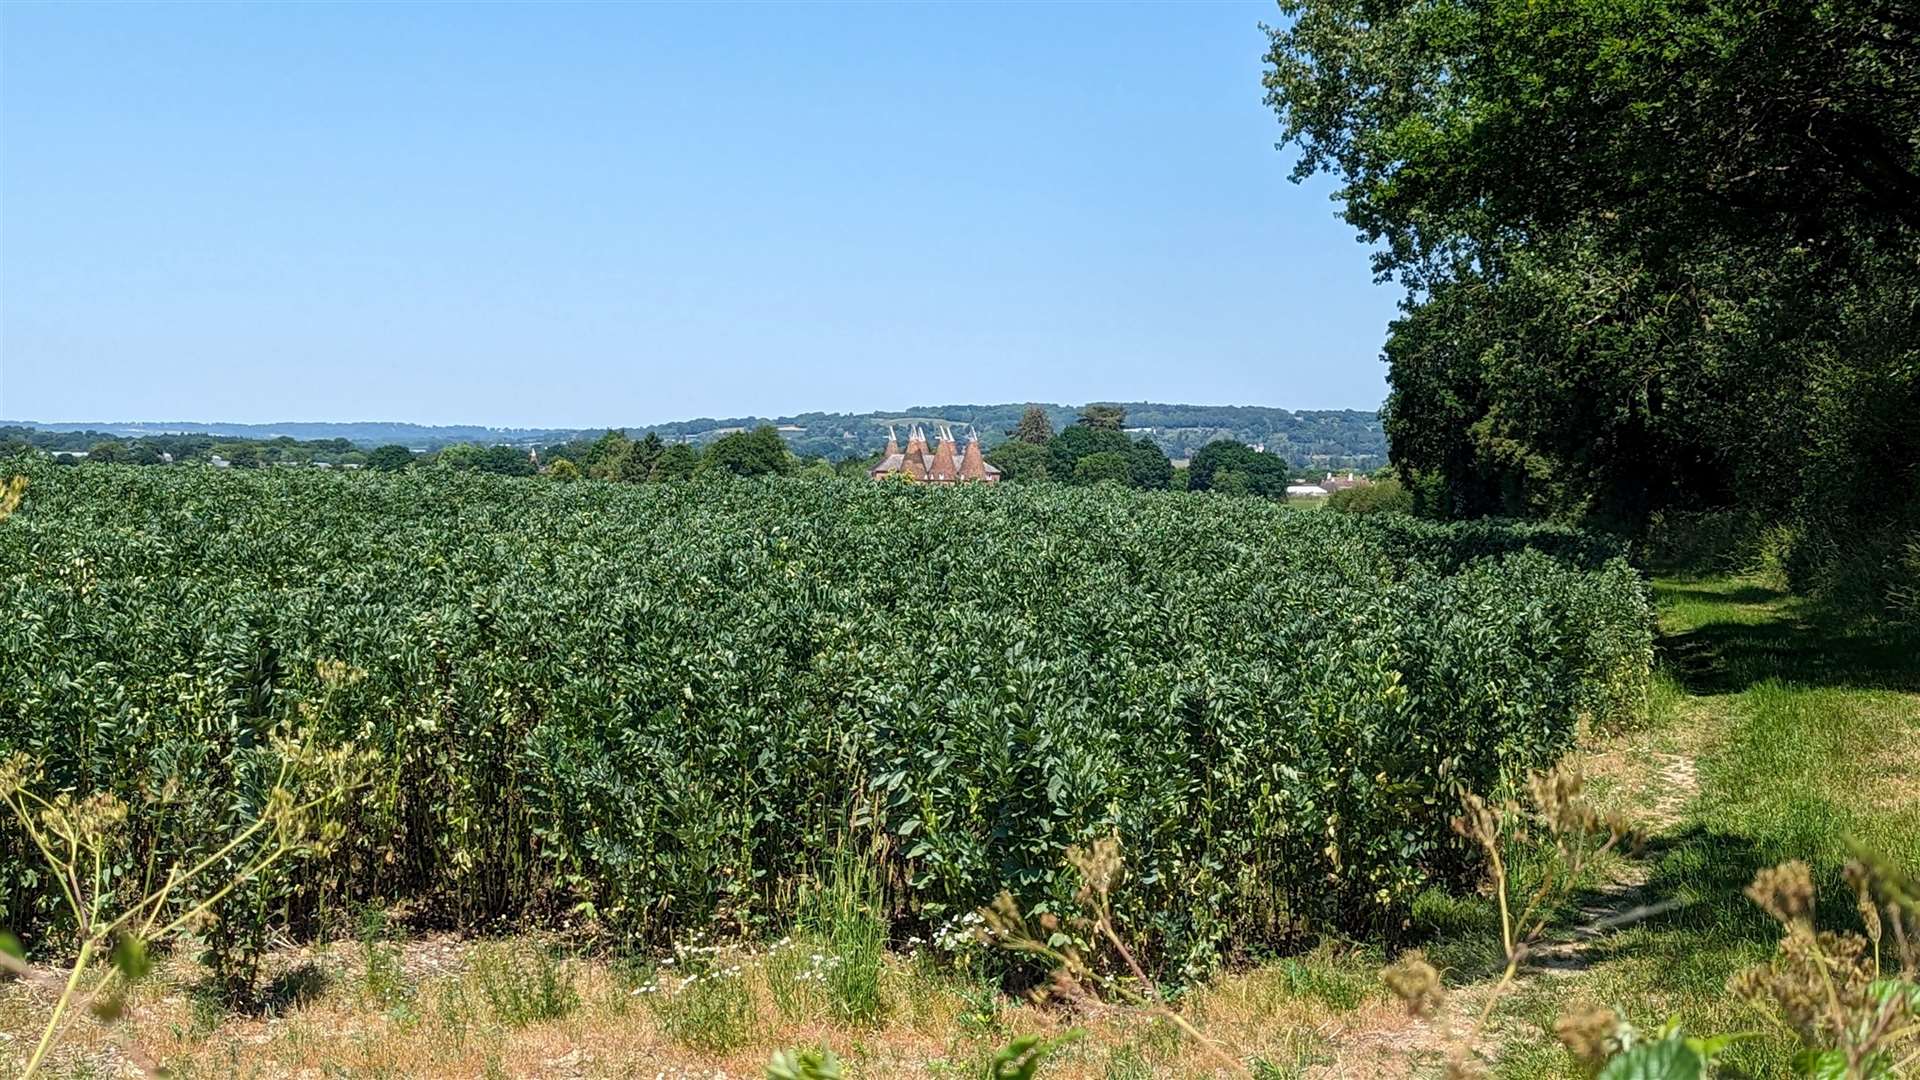 An oast house visible on the horizon